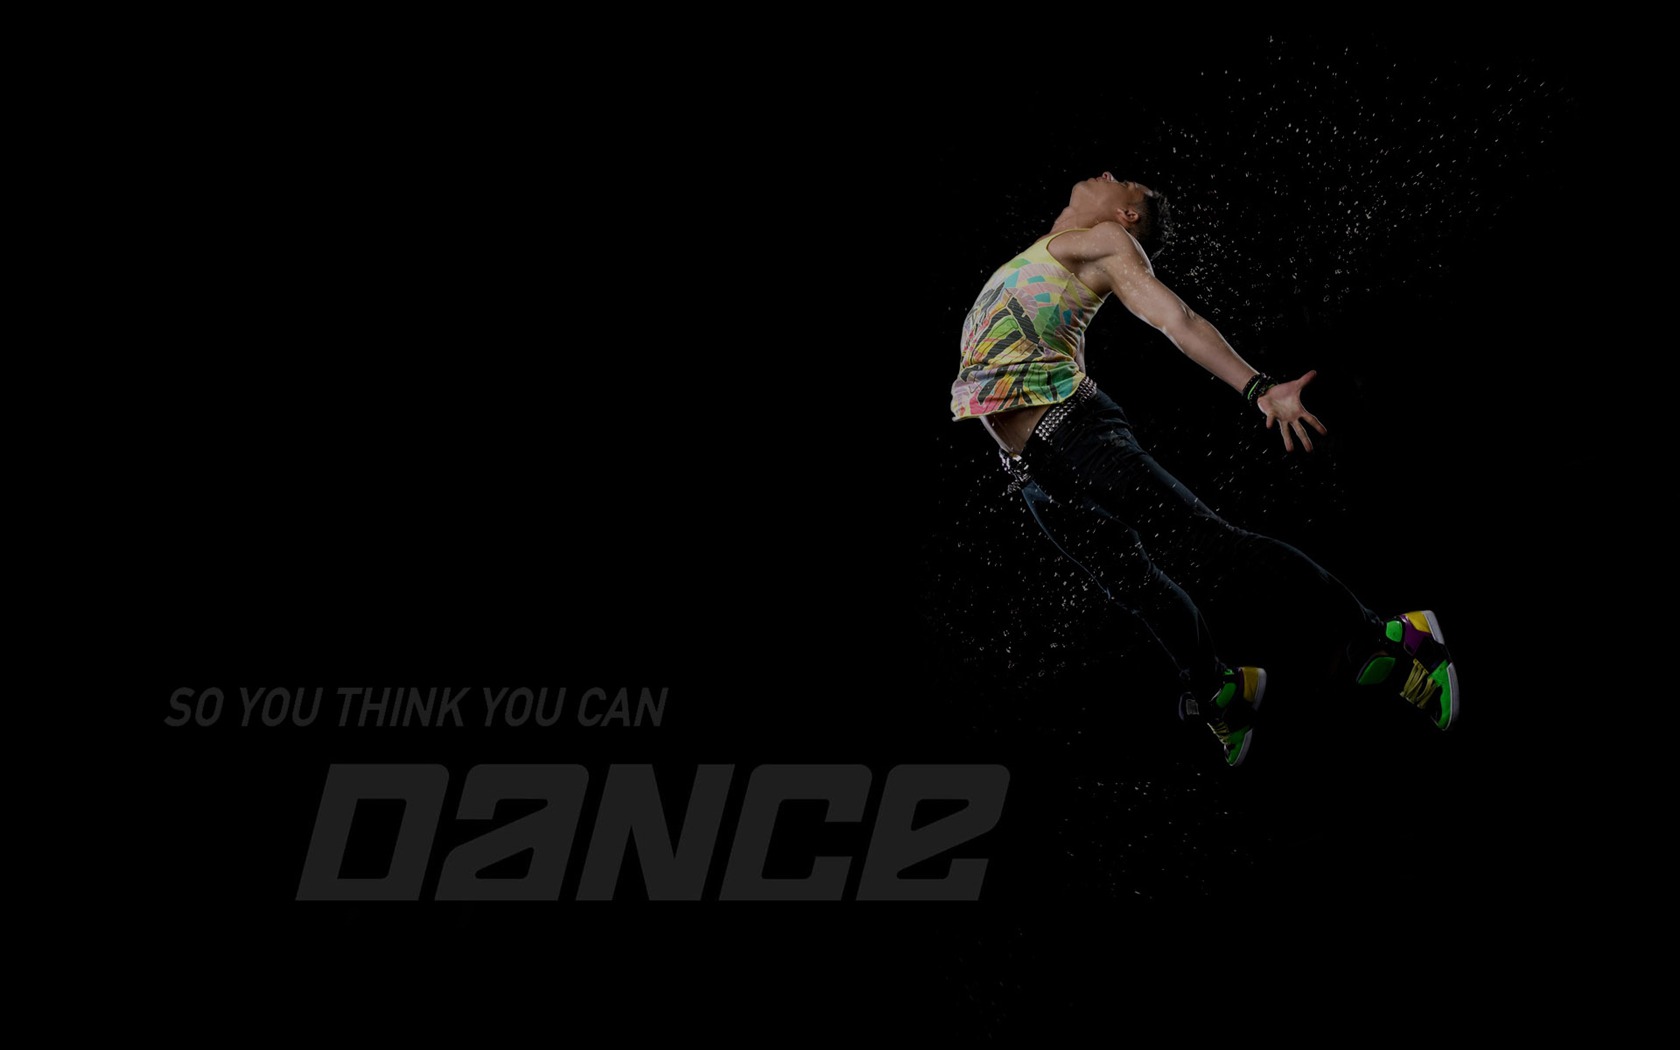 So You Think You Can Dance 舞林争霸 壁纸(二)6 - 1680x1050